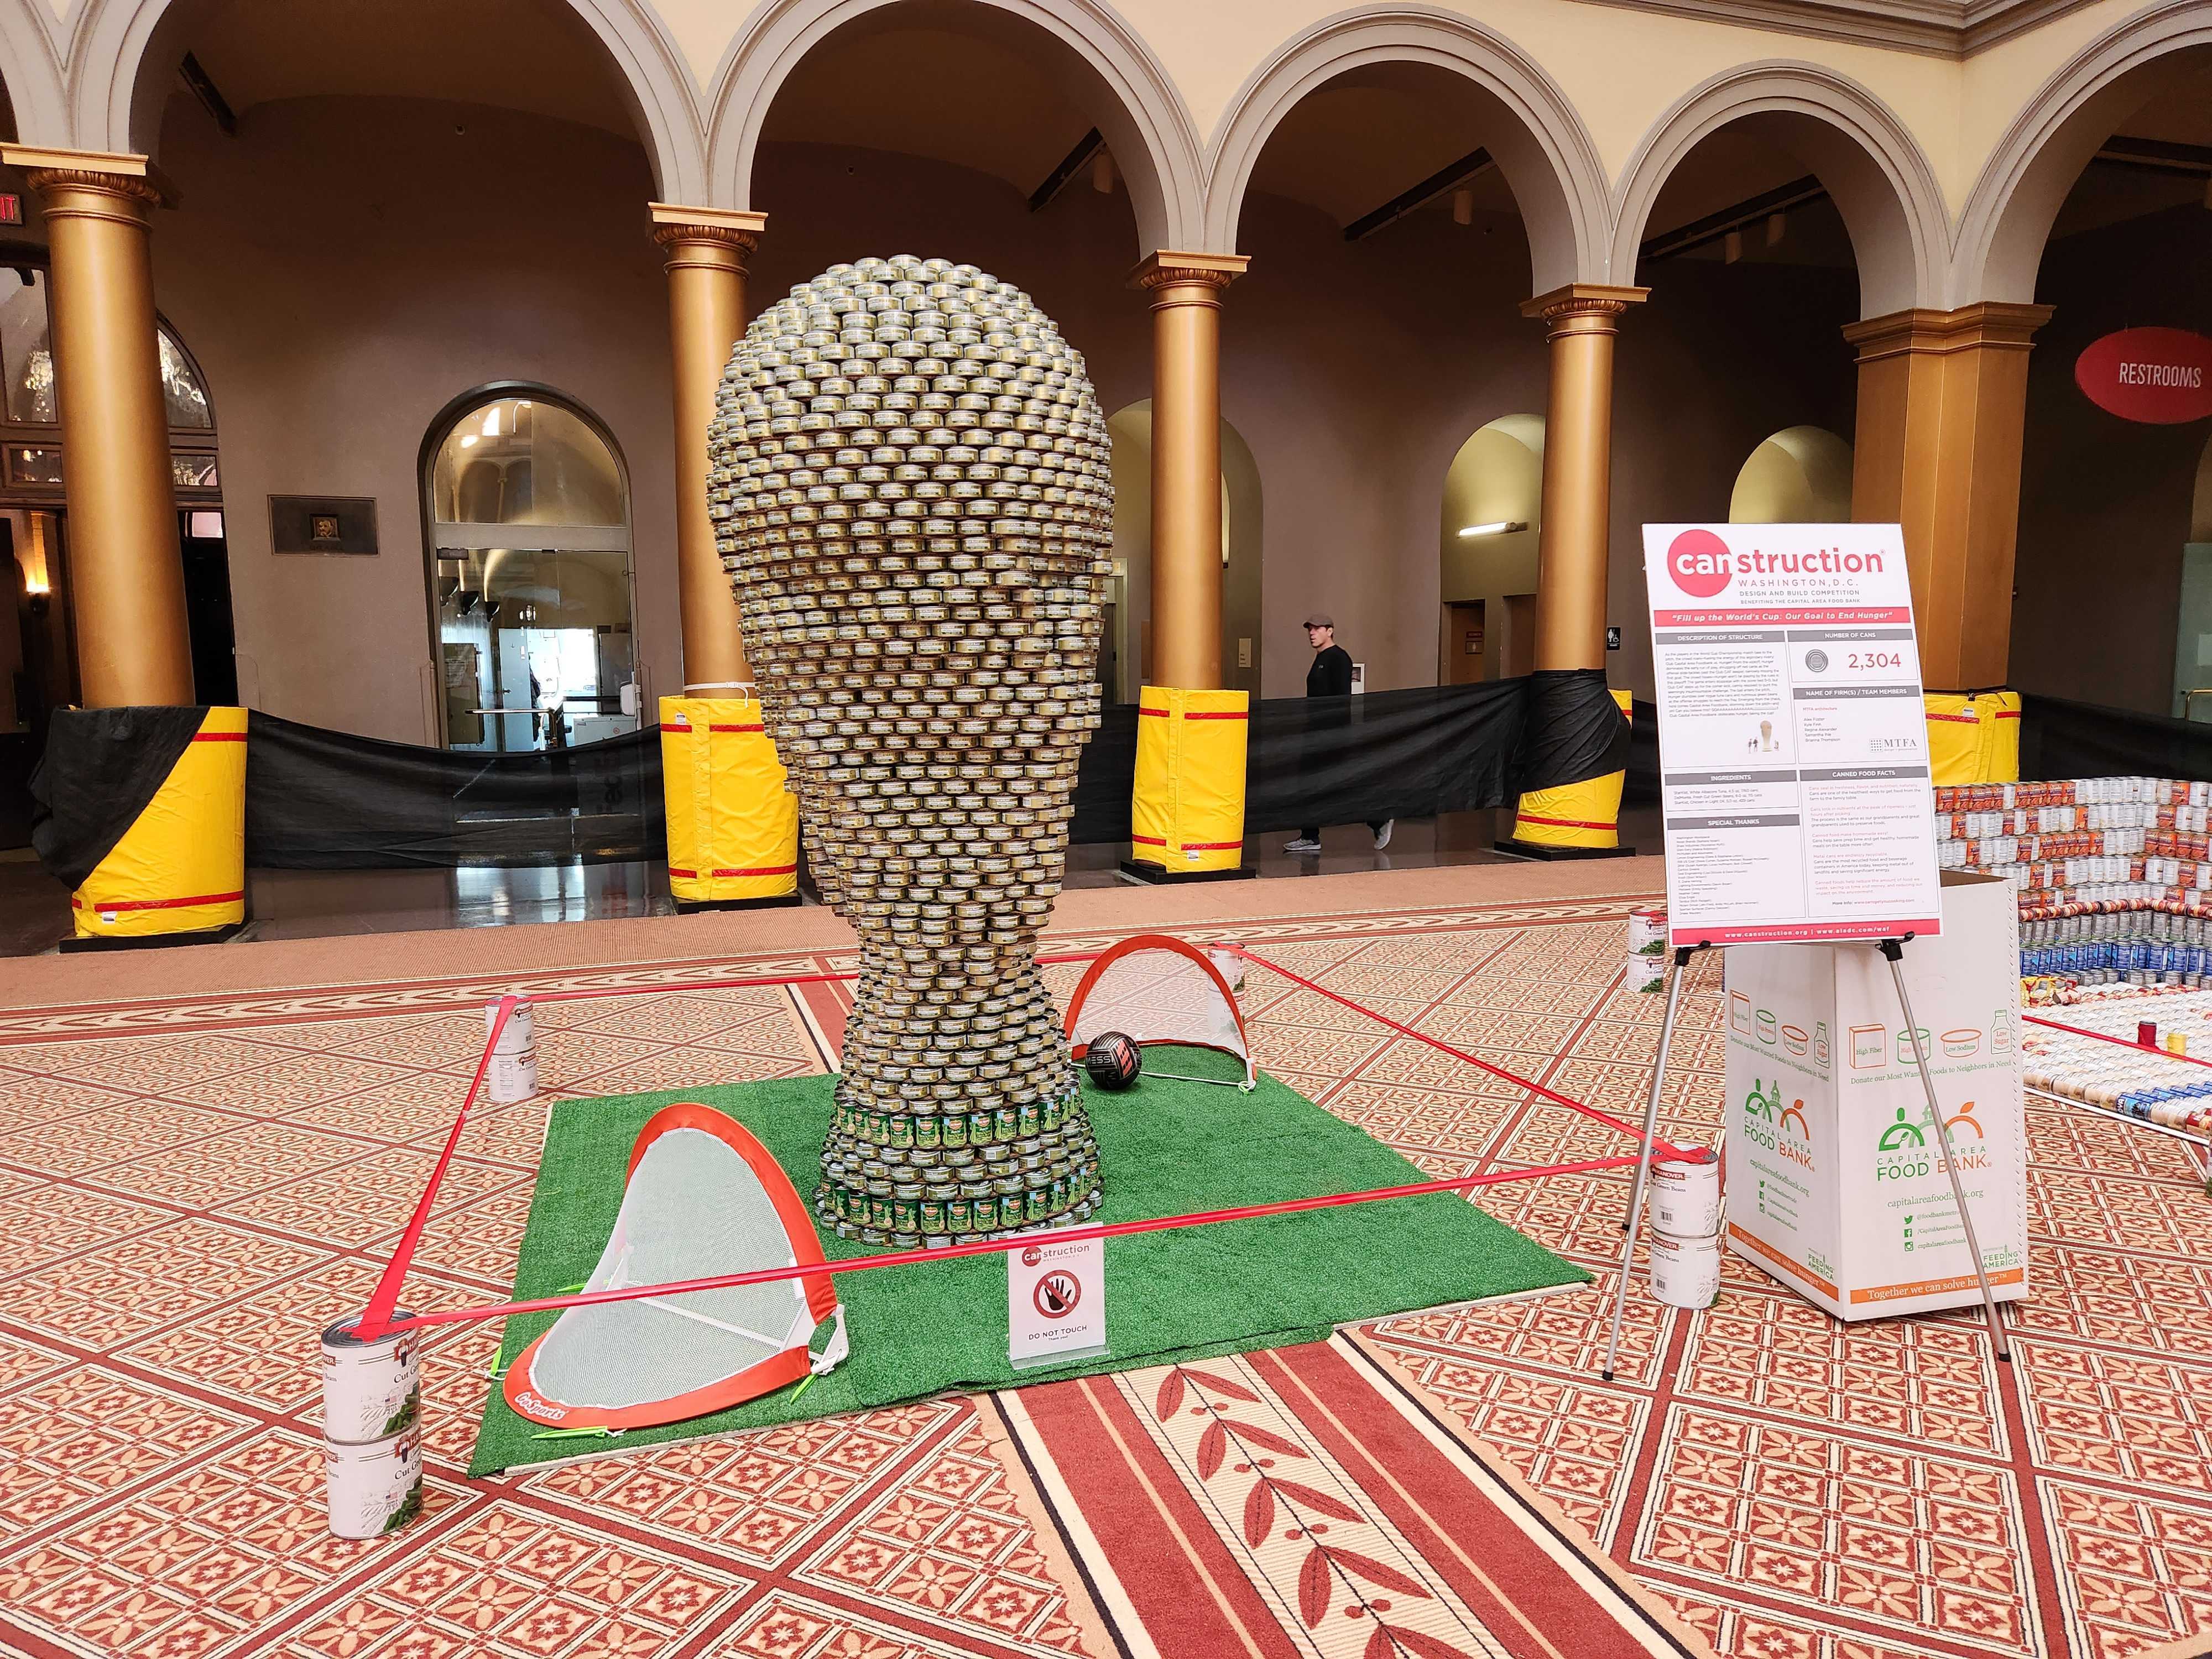 Image of canned food sculpture in shape of world cup trophy